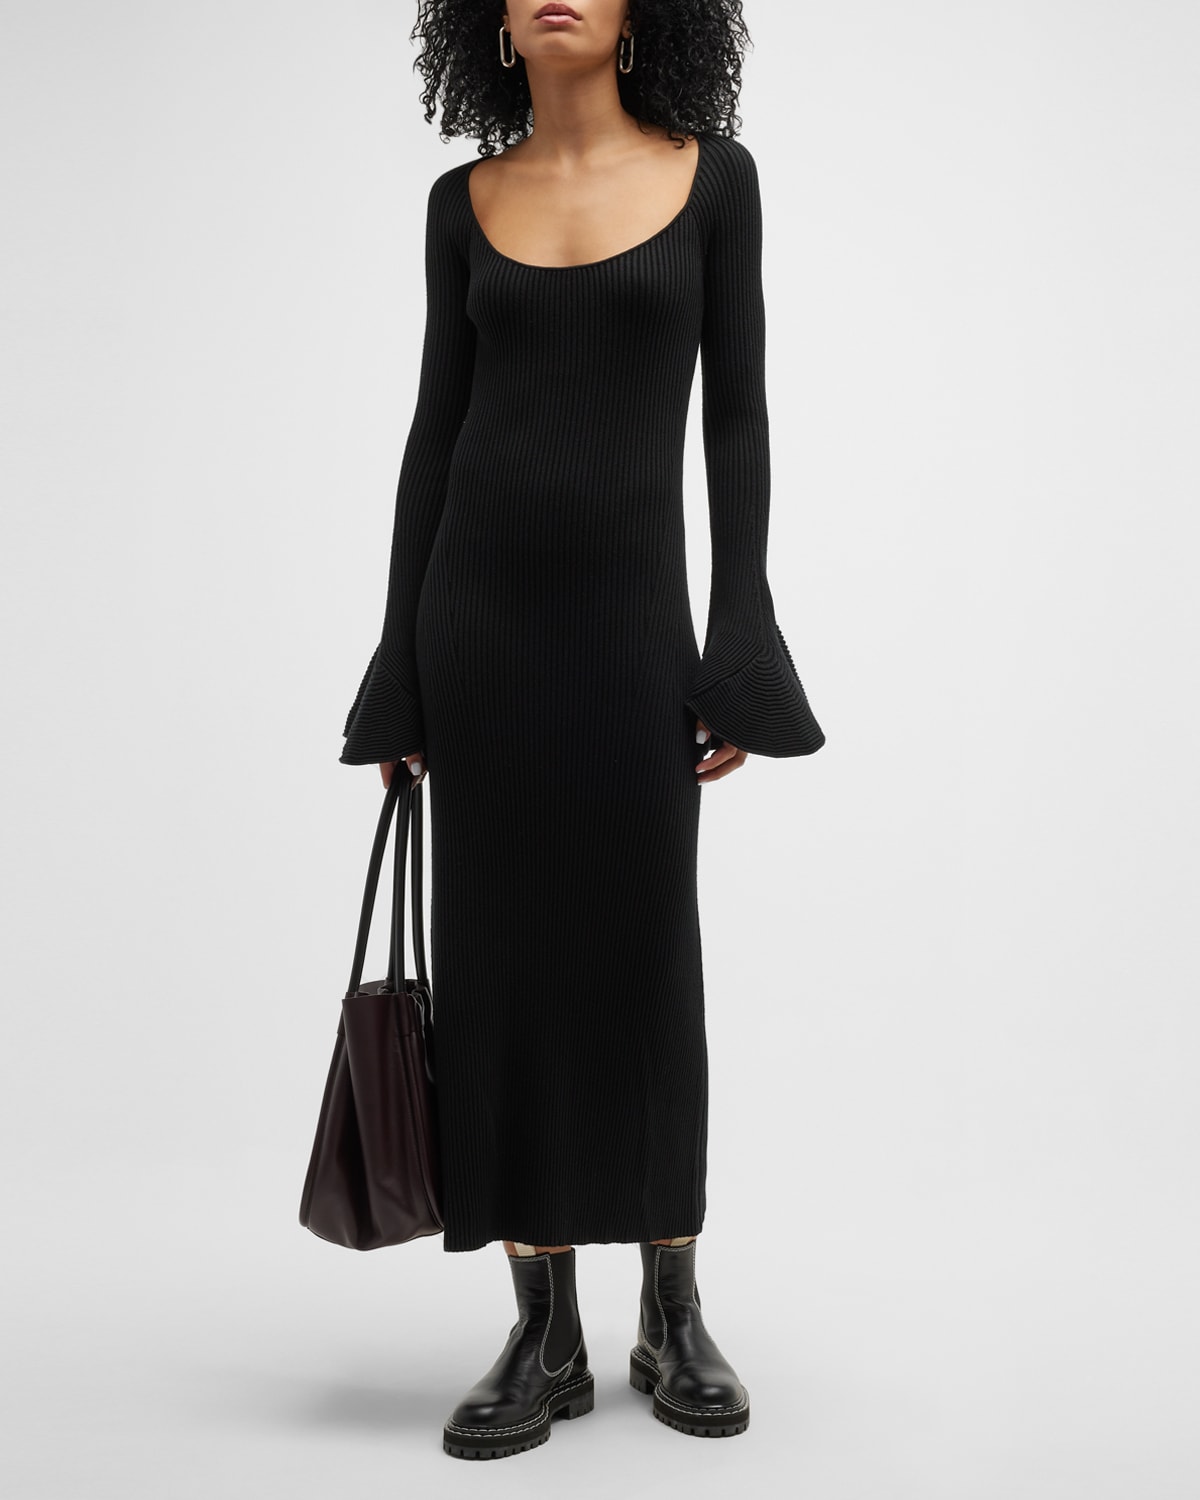 Proenza Schouler Cashmere Knit Dress W/ Fluted Sleeves In Black